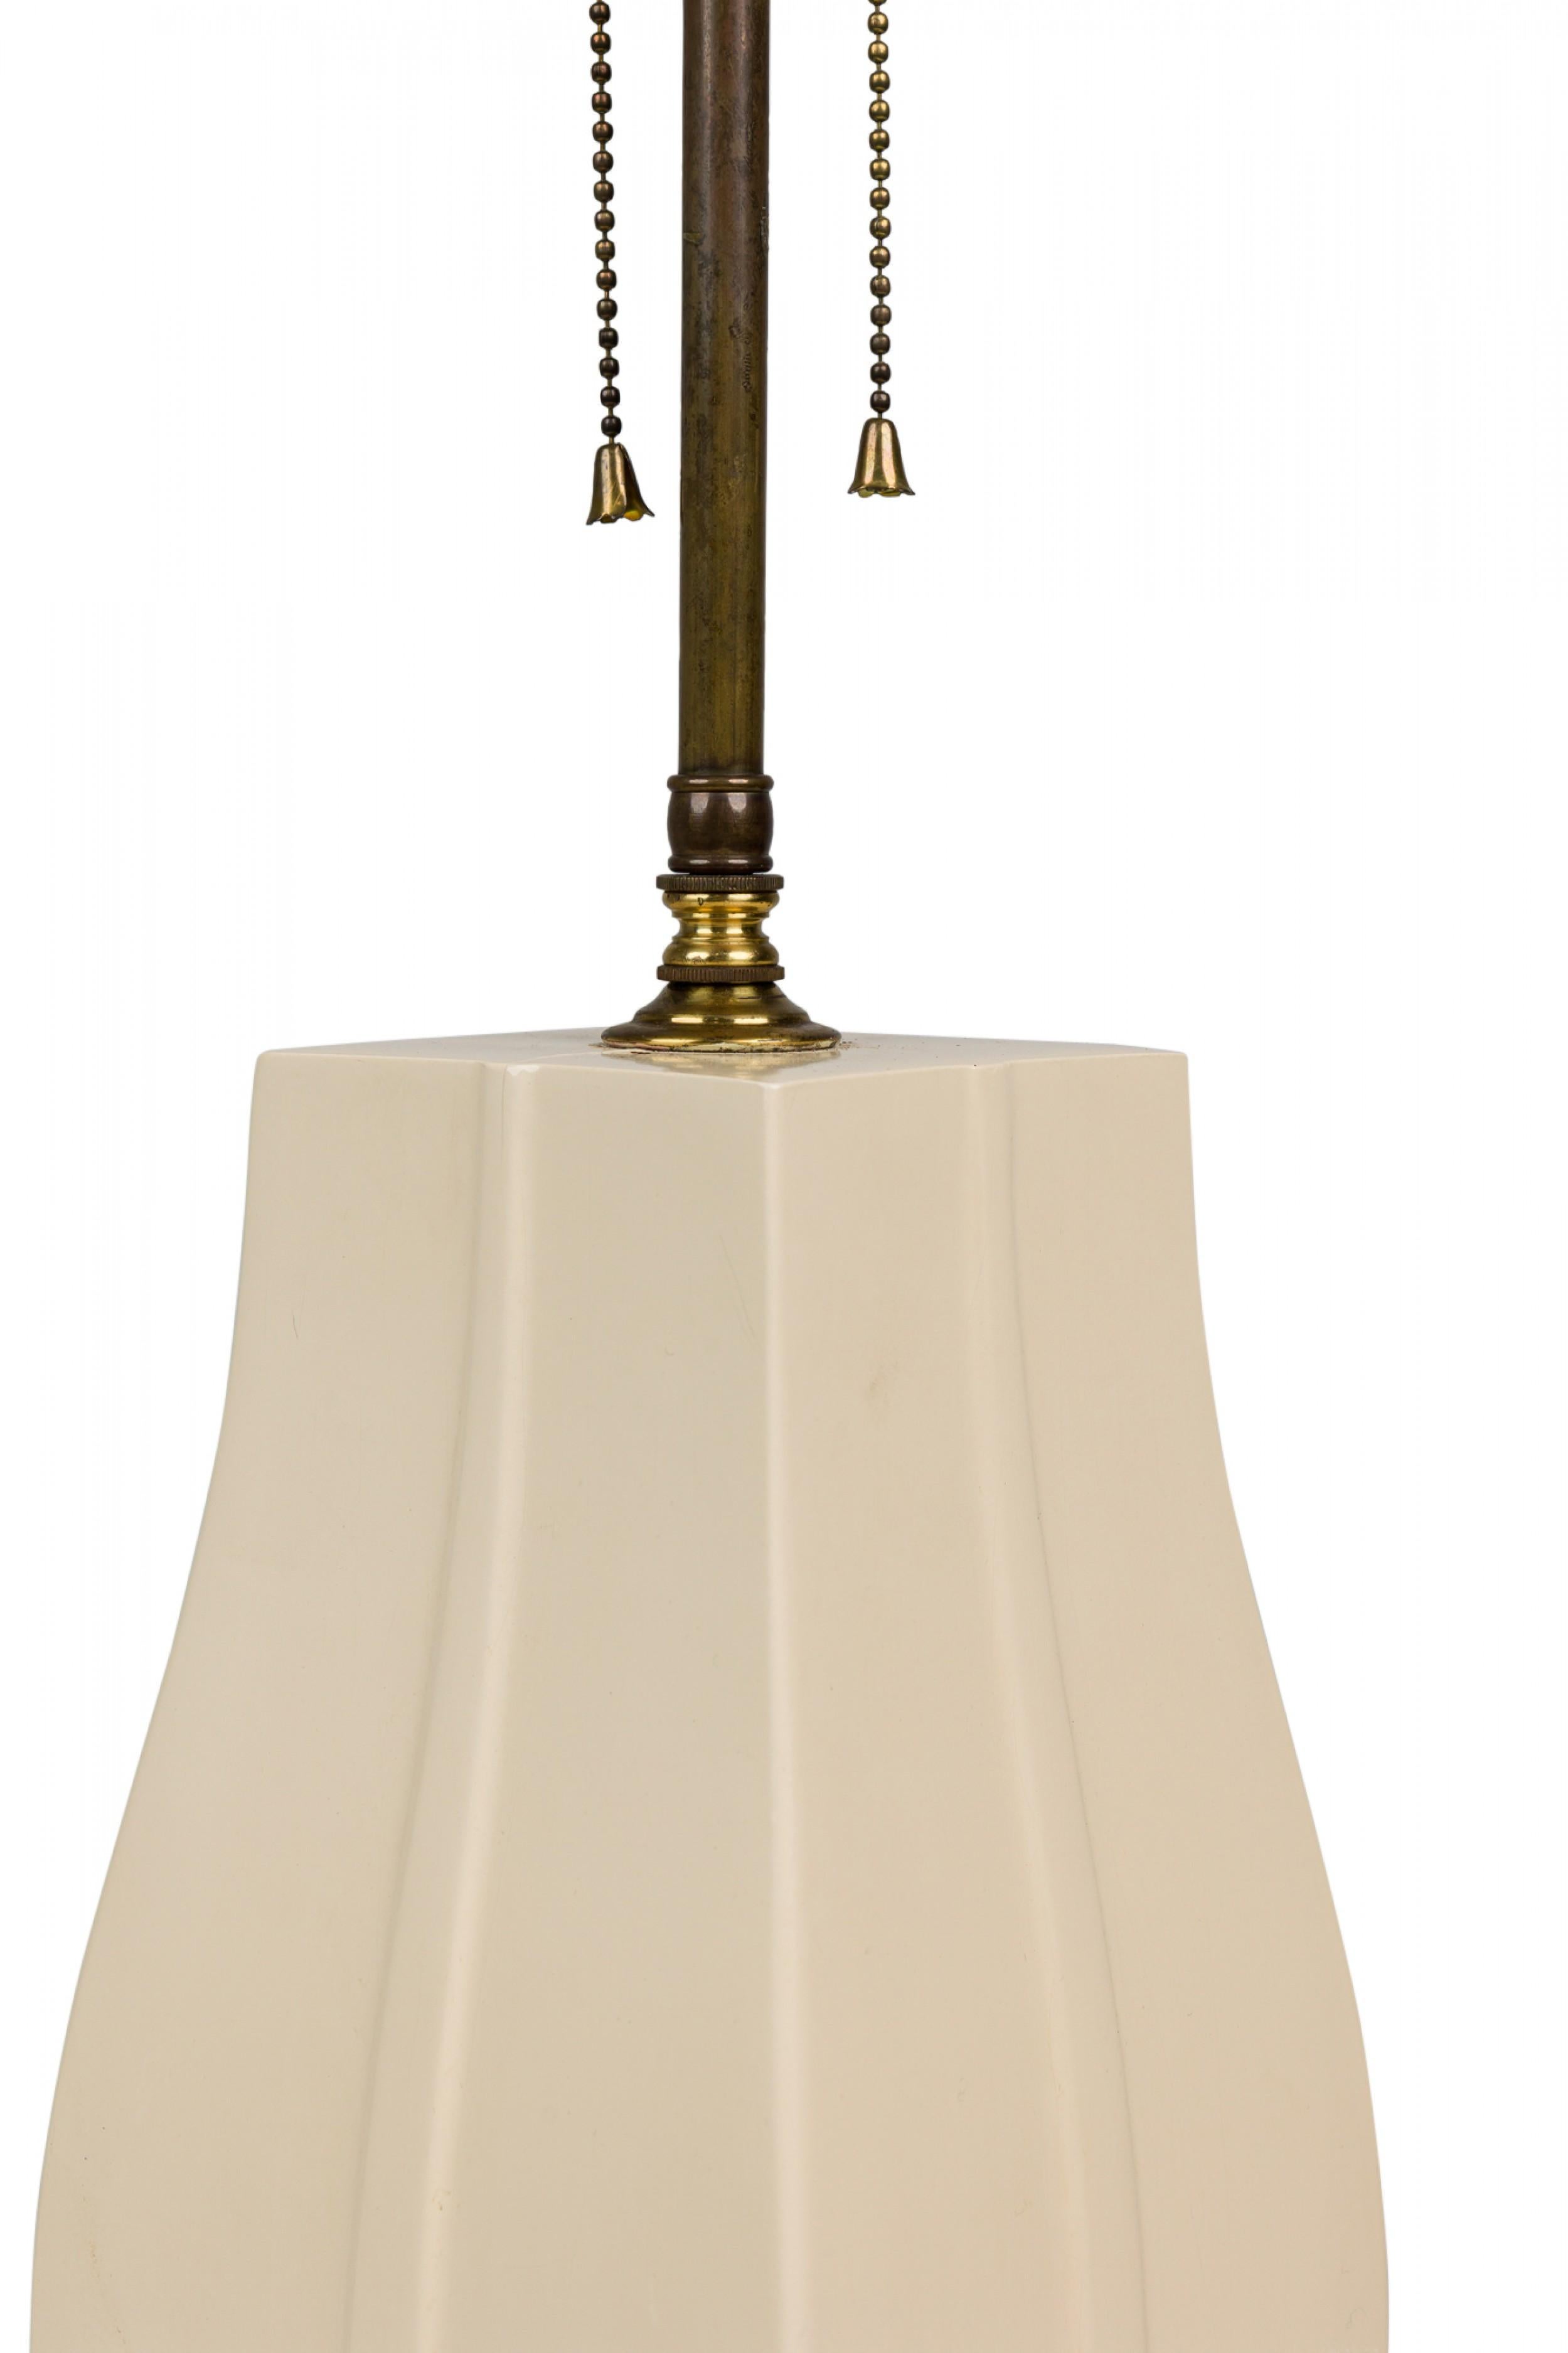 Pair of Midcentury American White Lacquer Bombe Form Table Lamps on Brass Bases For Sale 2